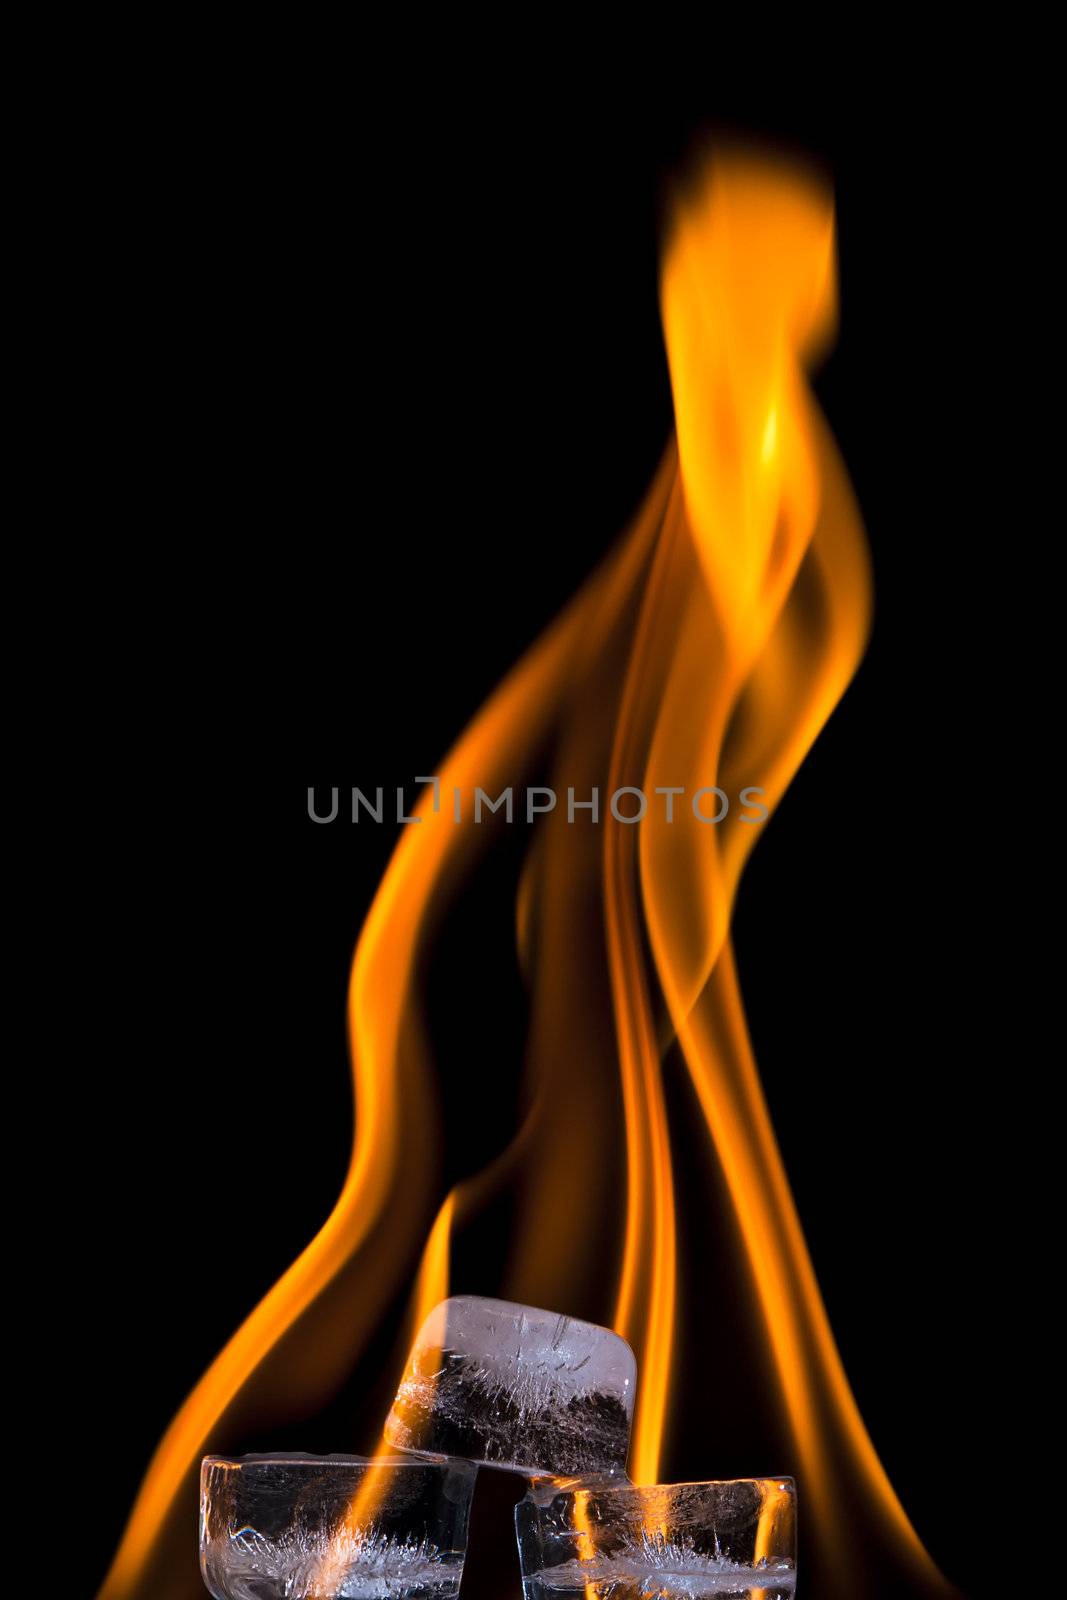 A trio of Ice cubes on fire showing flames